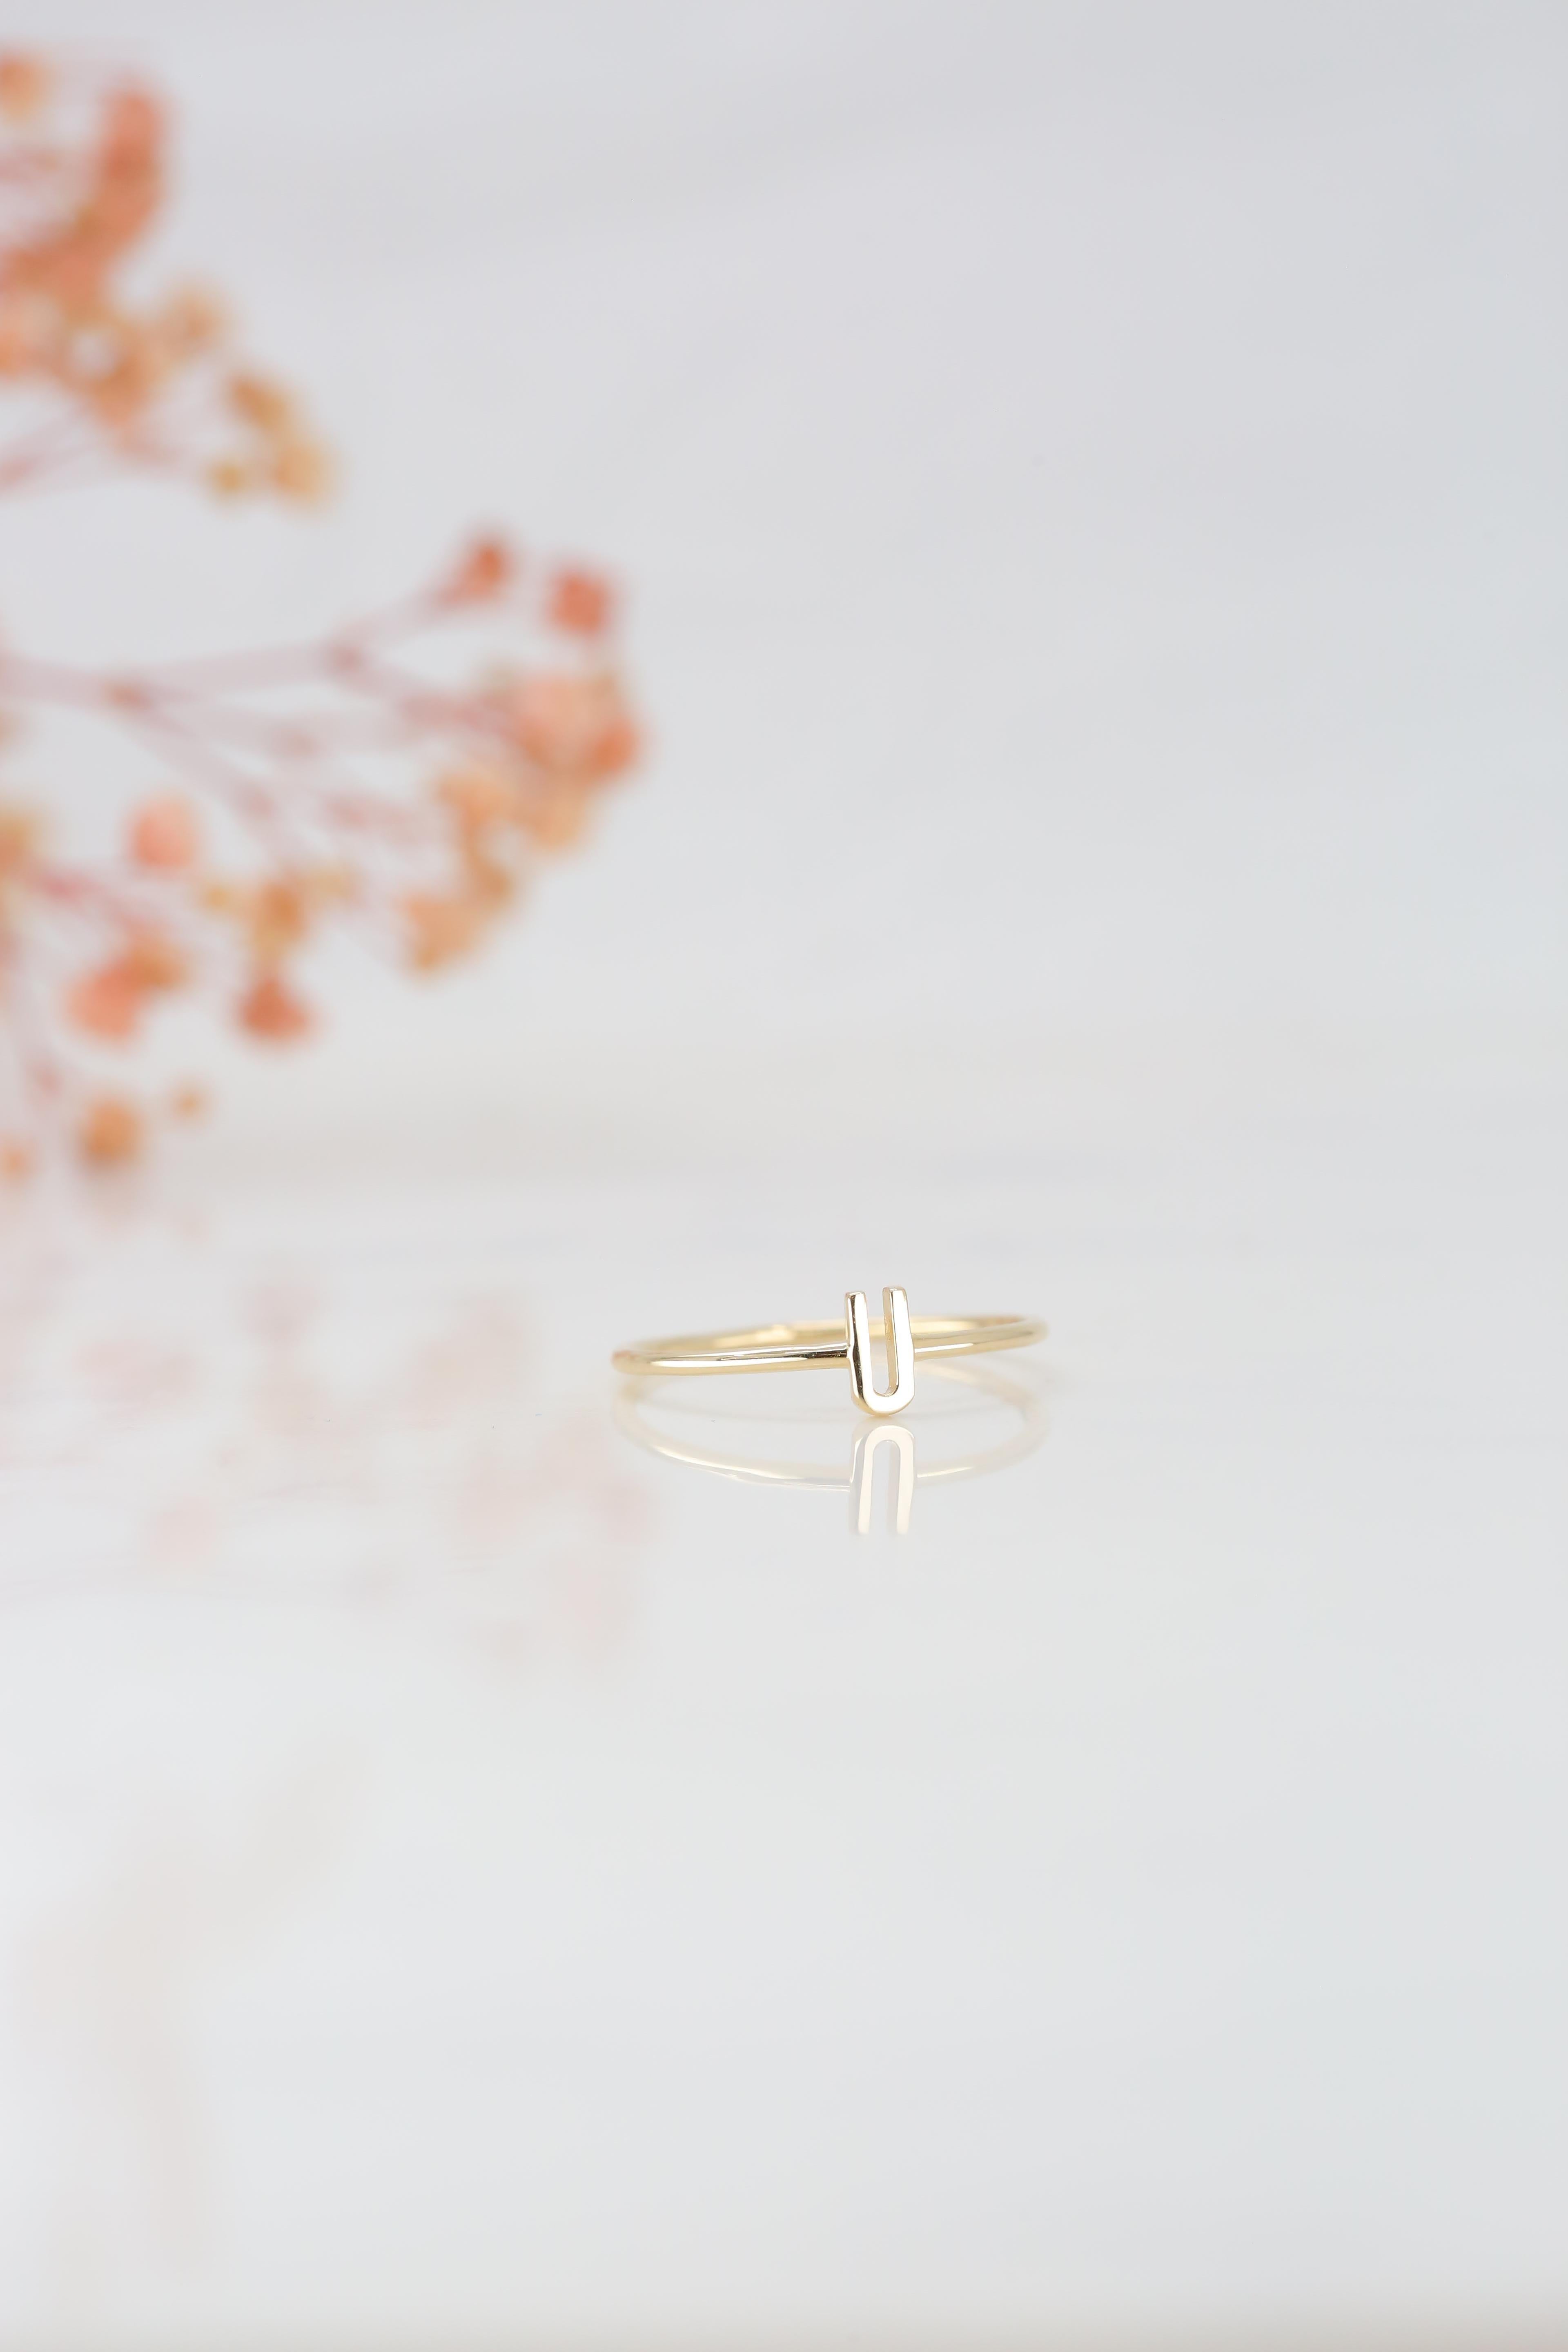 For Sale:  14K Gold Initial U Letter Ring, Personalized Initial Letter Ring 7